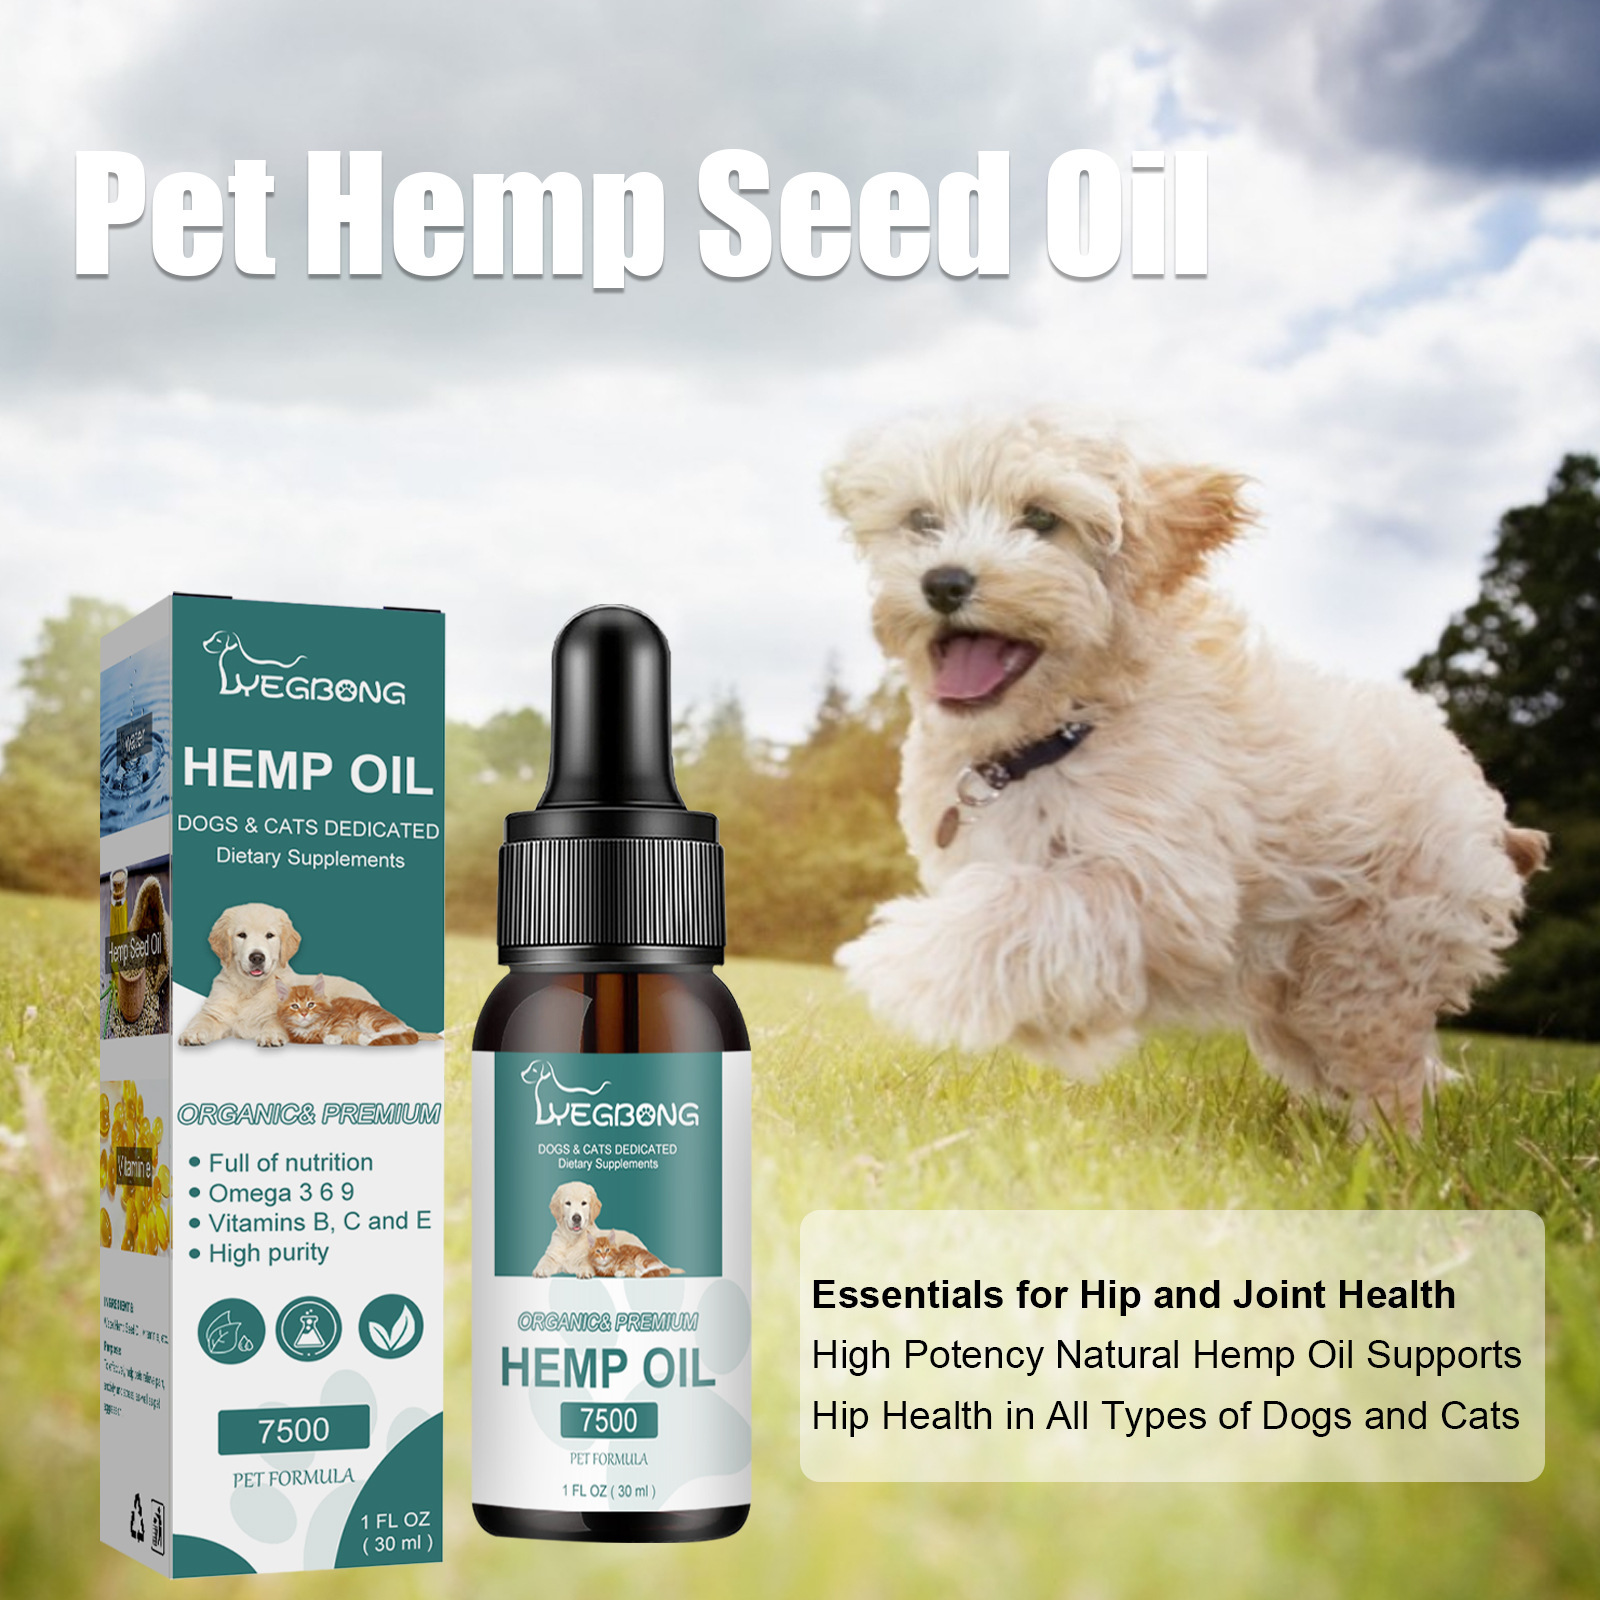 Yegbong Pet Hemp Seed Oil Dogs and Cats Anorexia Essential Oil